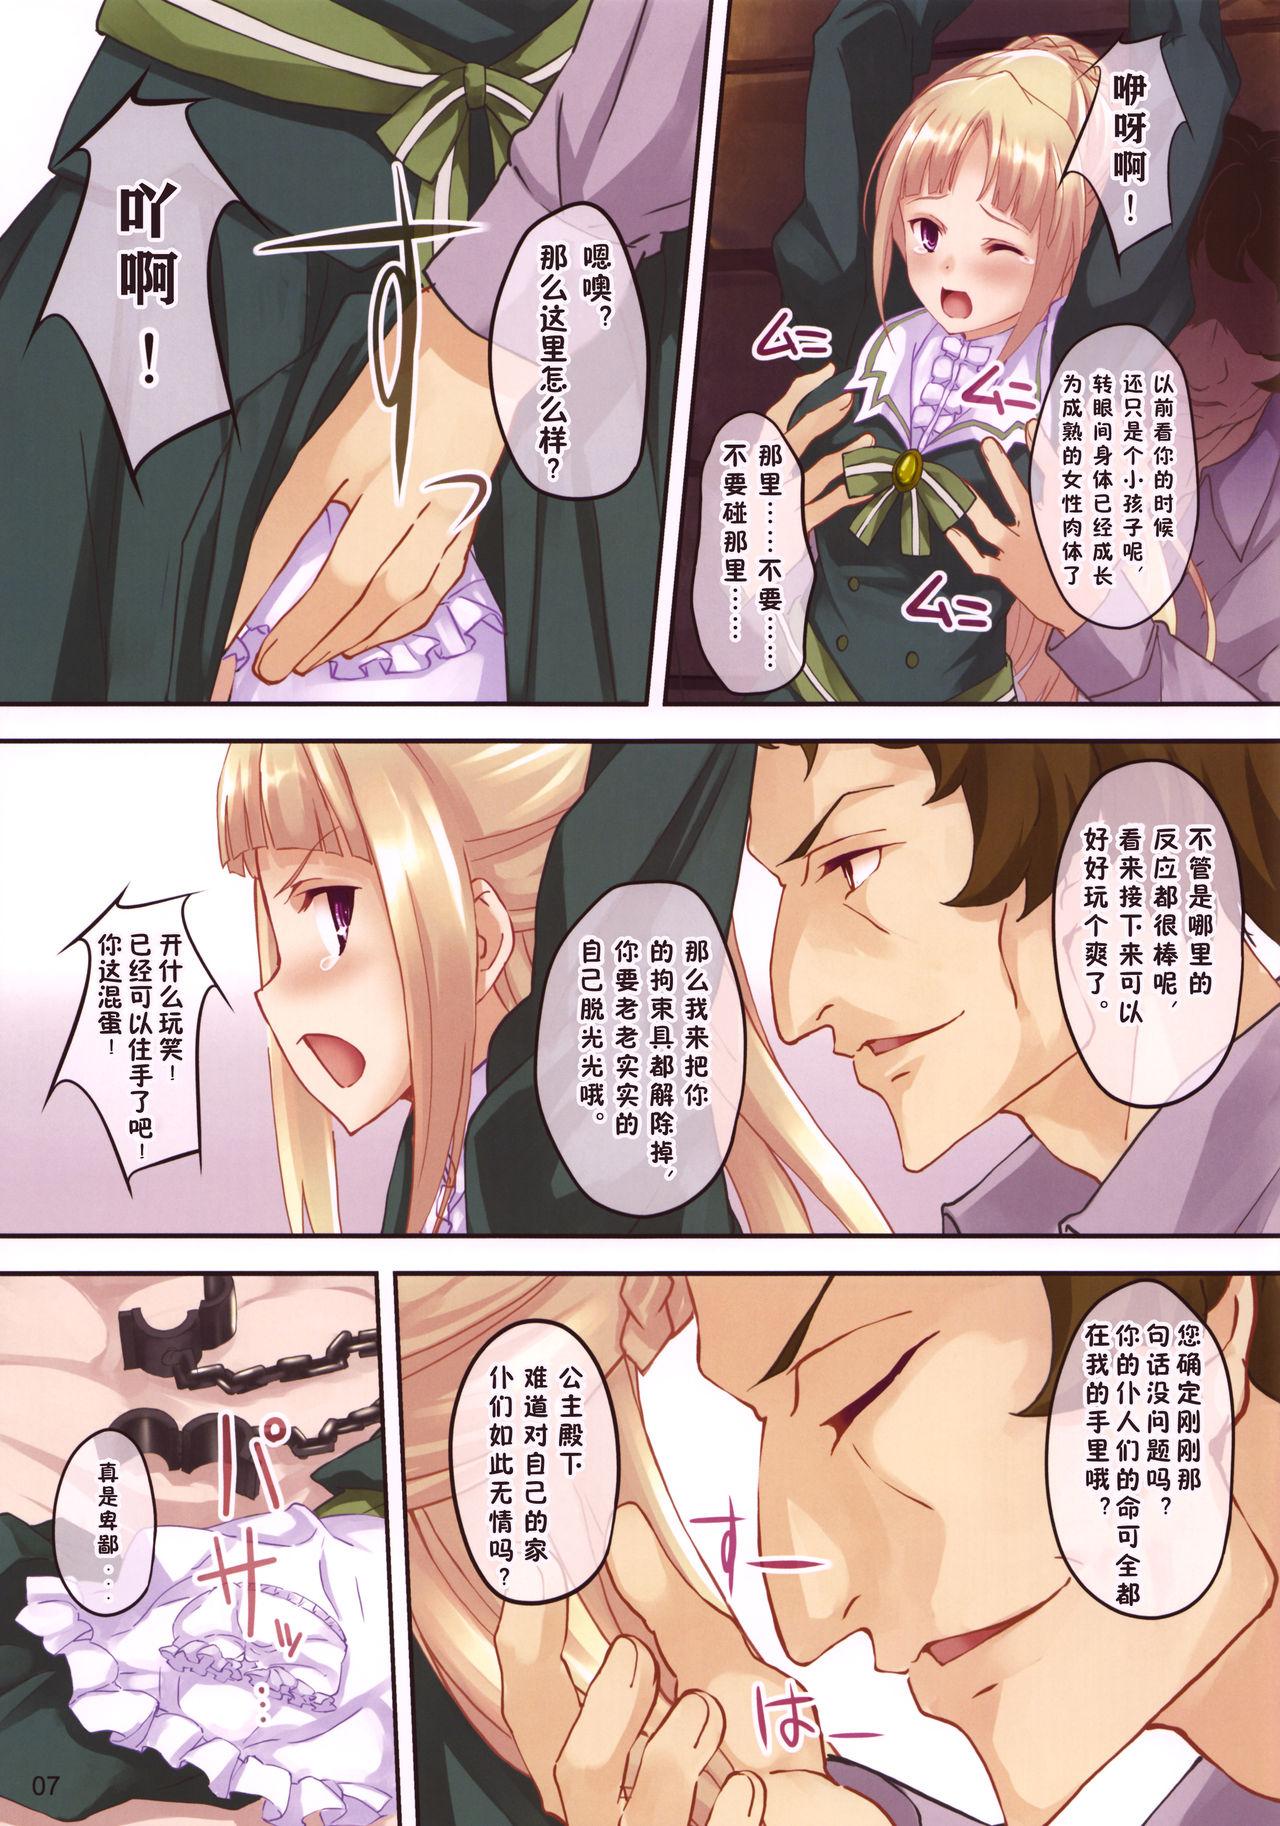 Longhair Flowers of a lost country - Shuumatsu no izetta Whore - Page 8